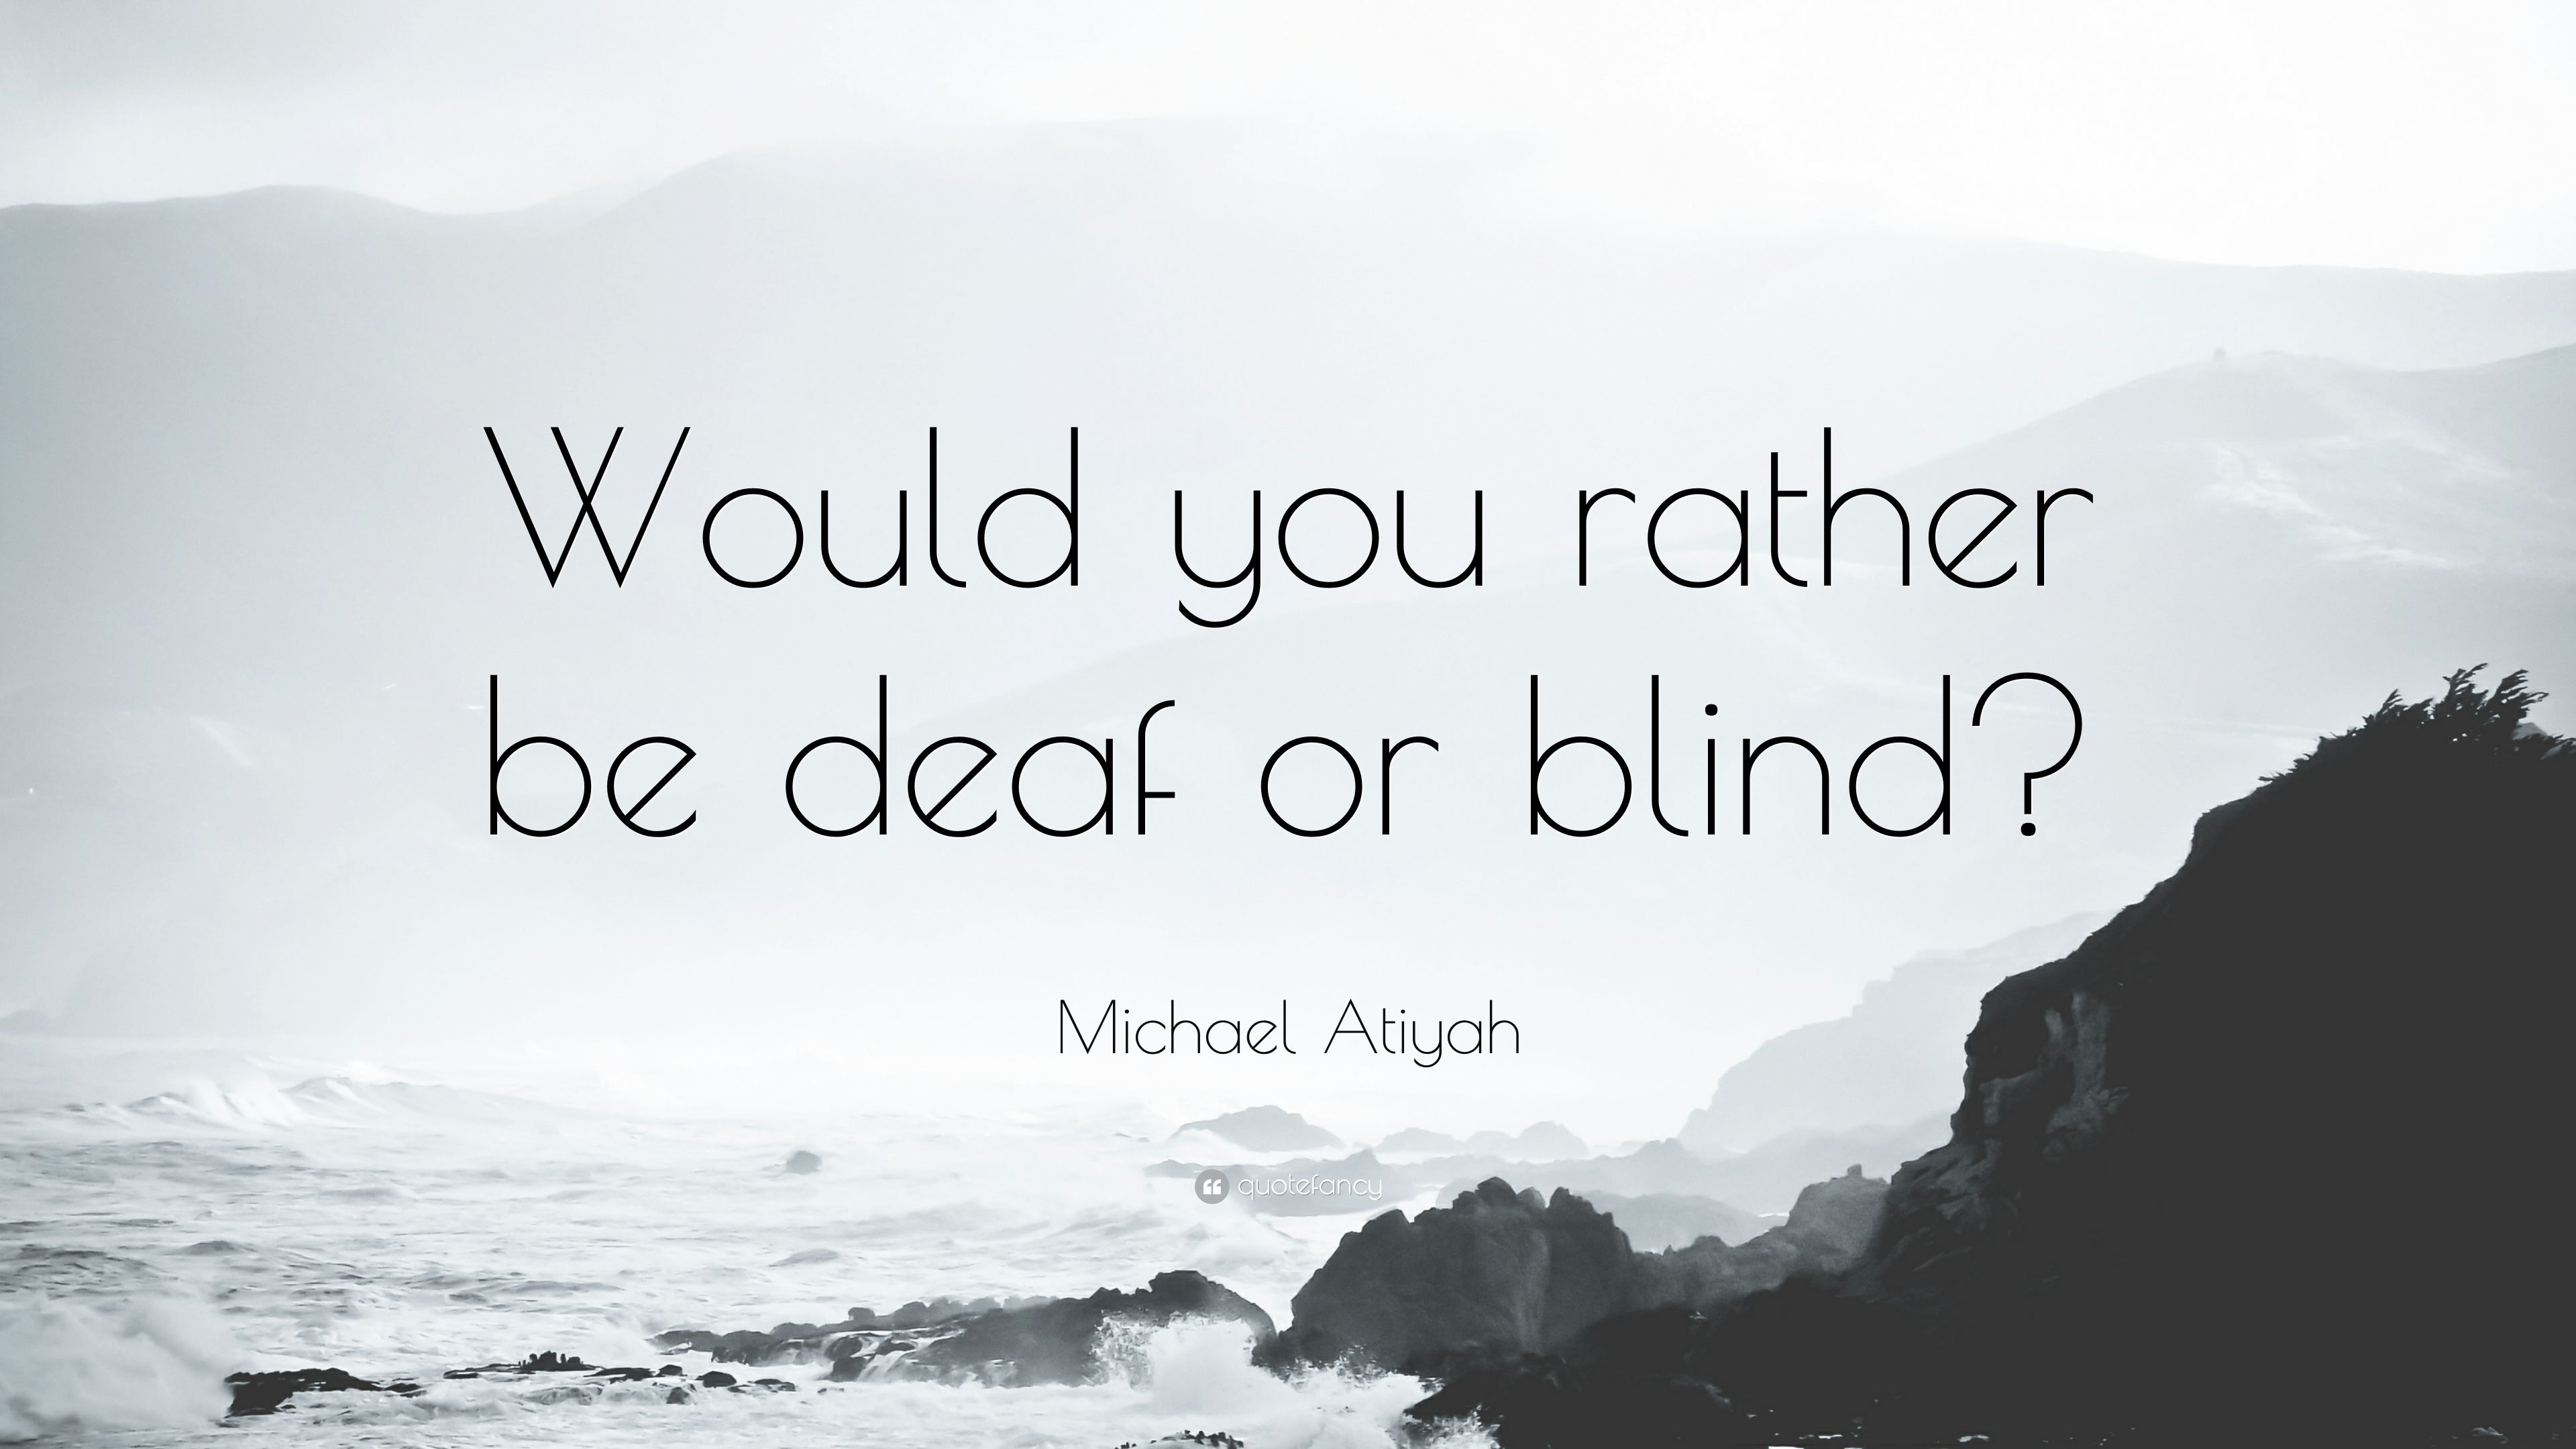 Michael Atiyah Quote: “Would you rather be deaf or blind?” (7 wallpaper)